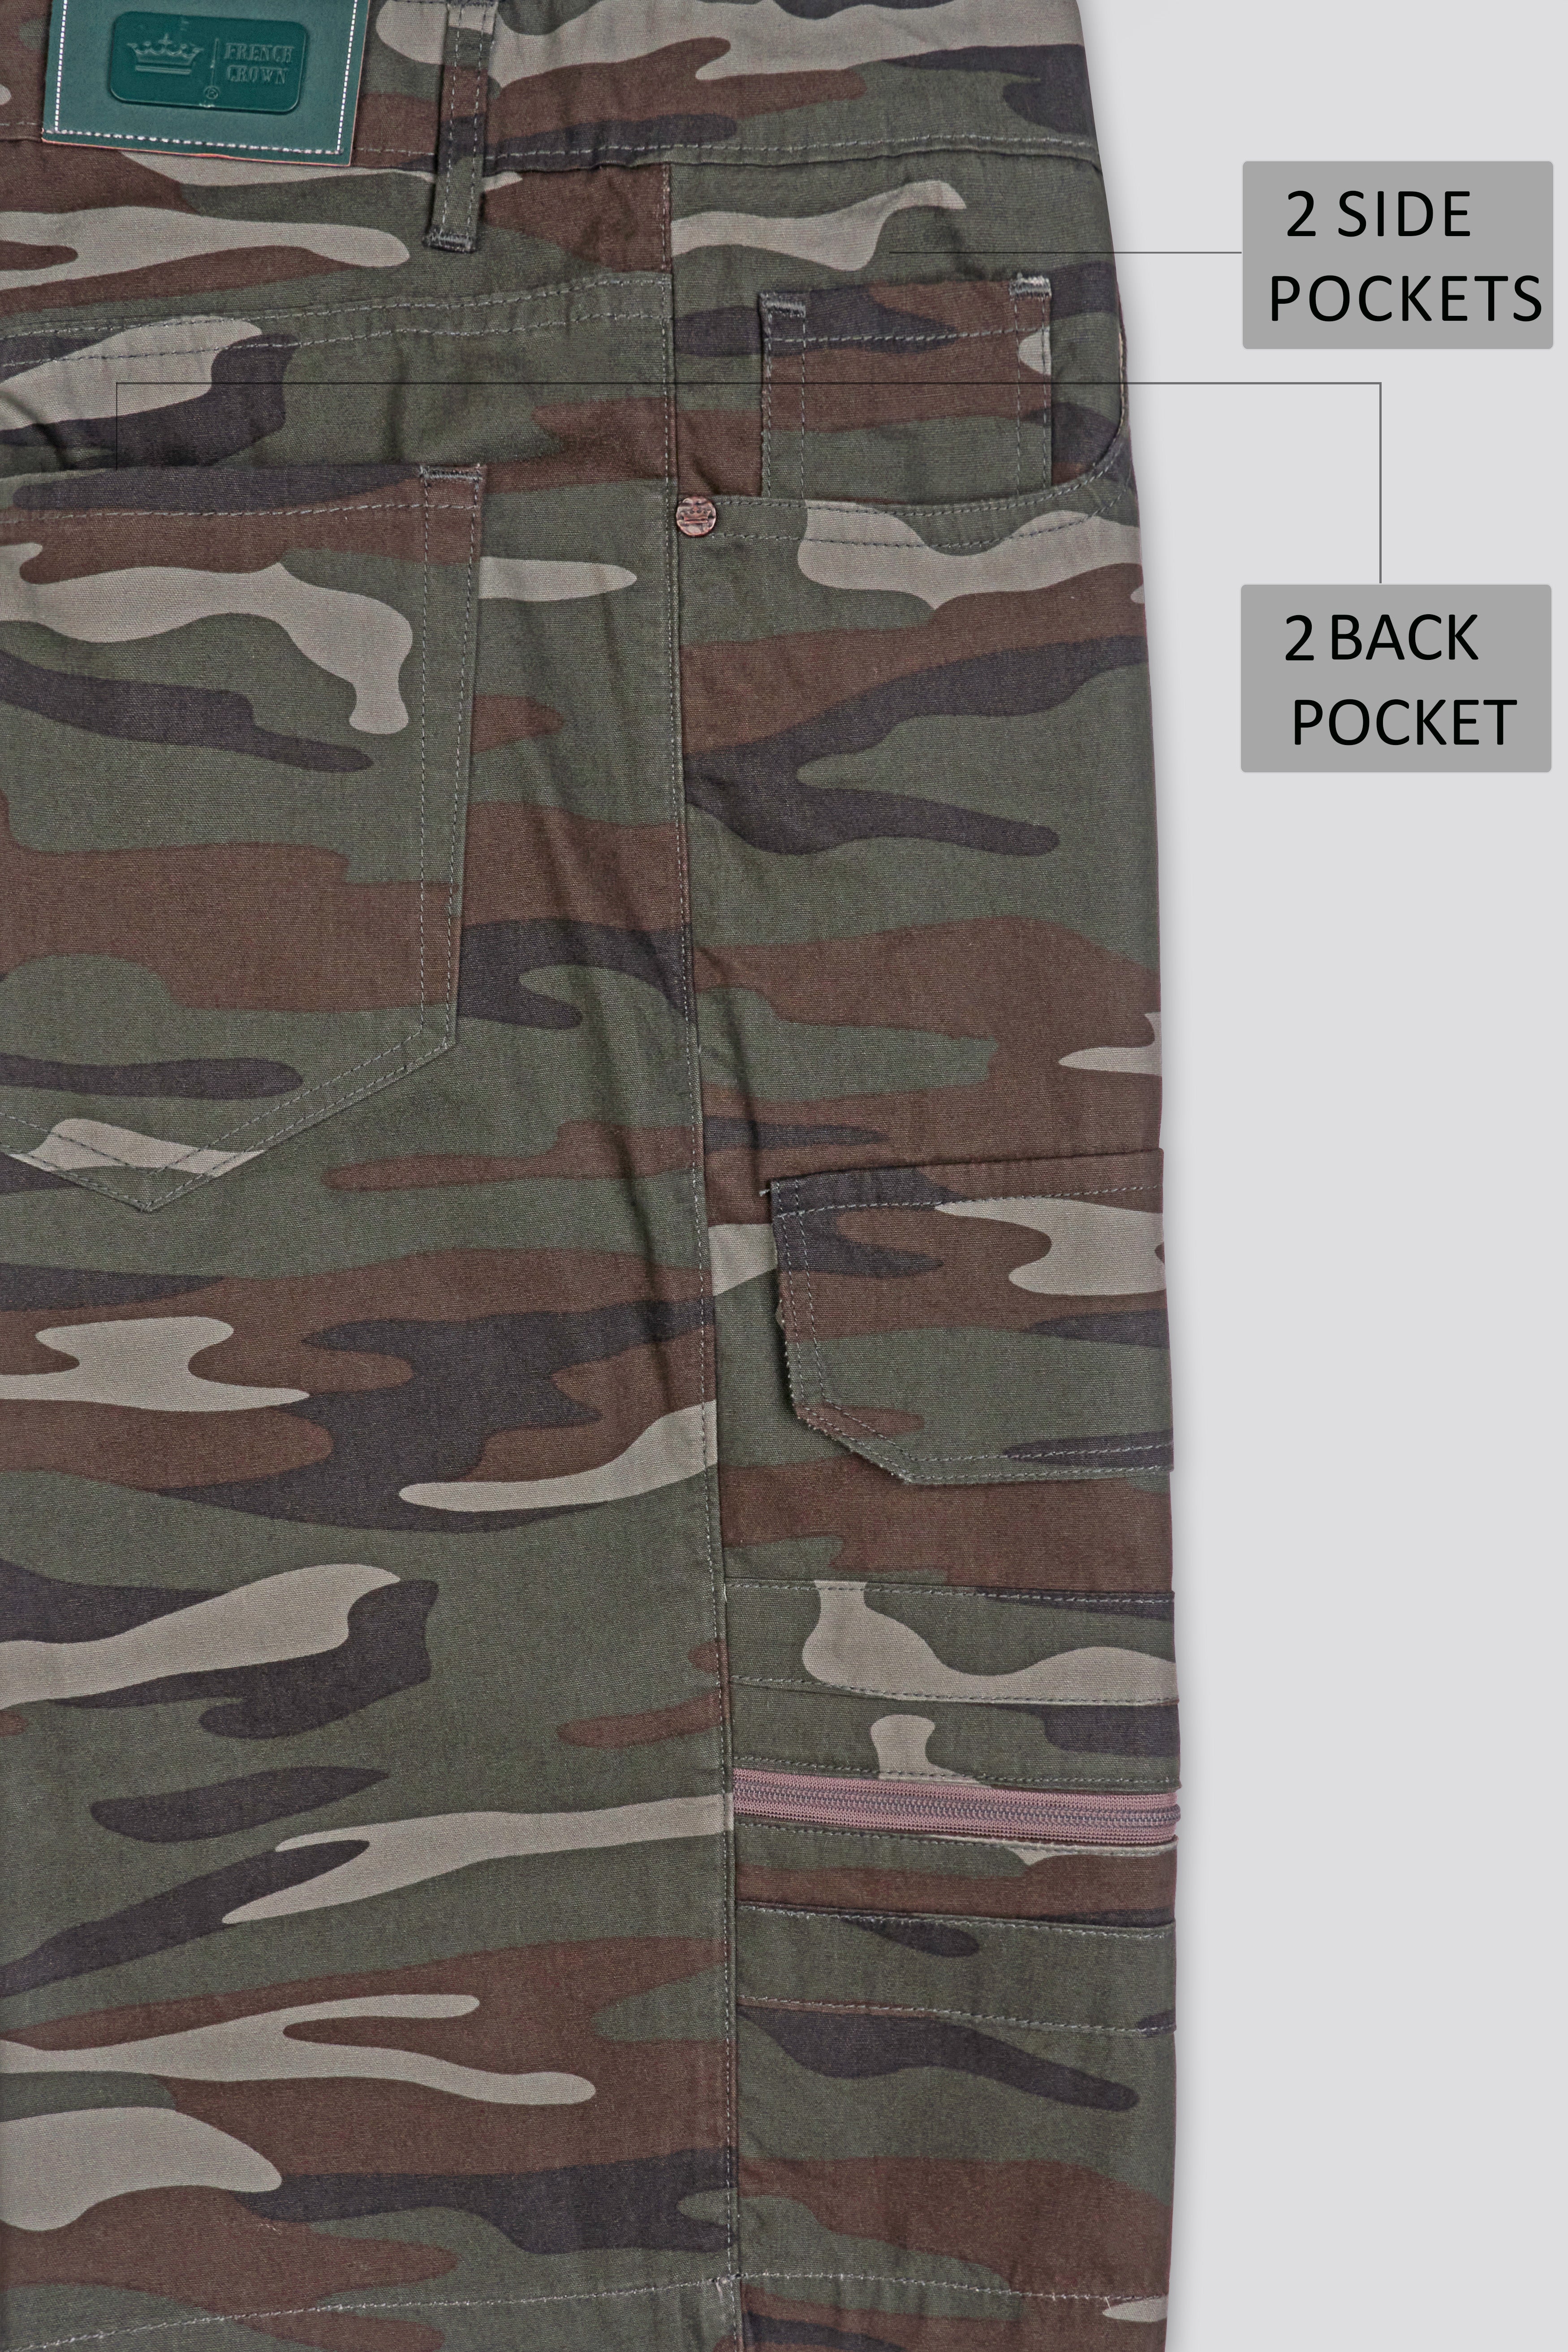 Tuscan Brown and Wenge Green Camouflage Cargo Shorts SR274-28, SR274-30, SR274-32, SR274-34, SR274-36, SR274-38, SR274-40, SR274-42, SR274-44